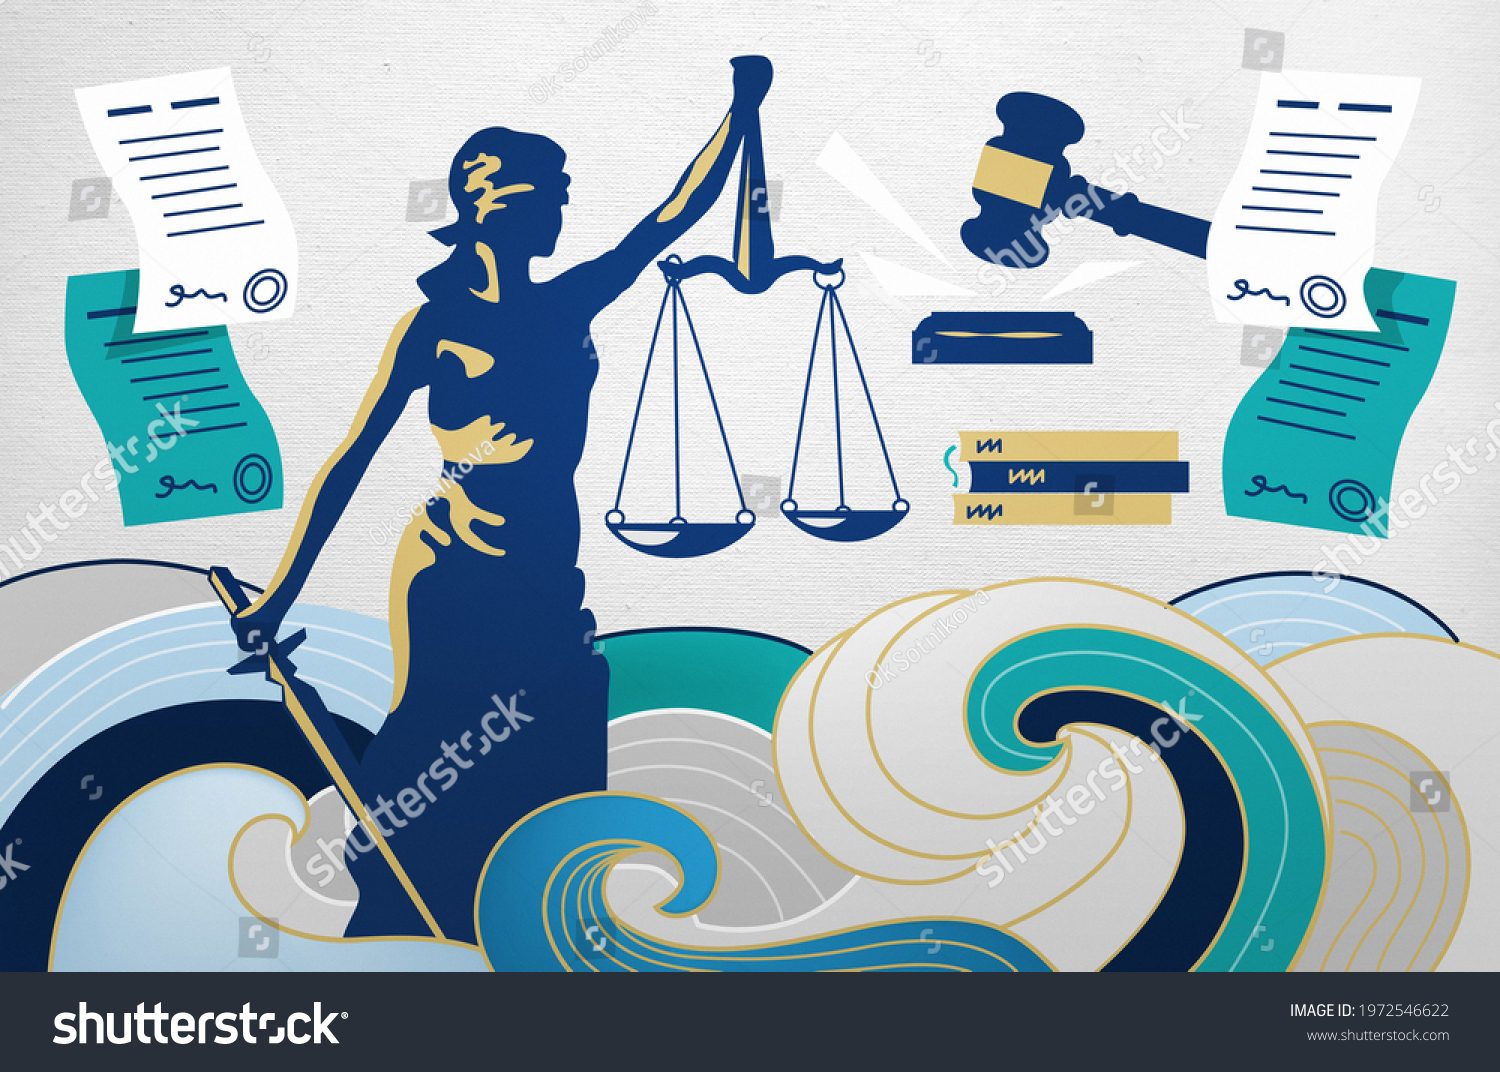 5 Facebook Cover Law Images, Stock Photos & Vectors | Shutterstock